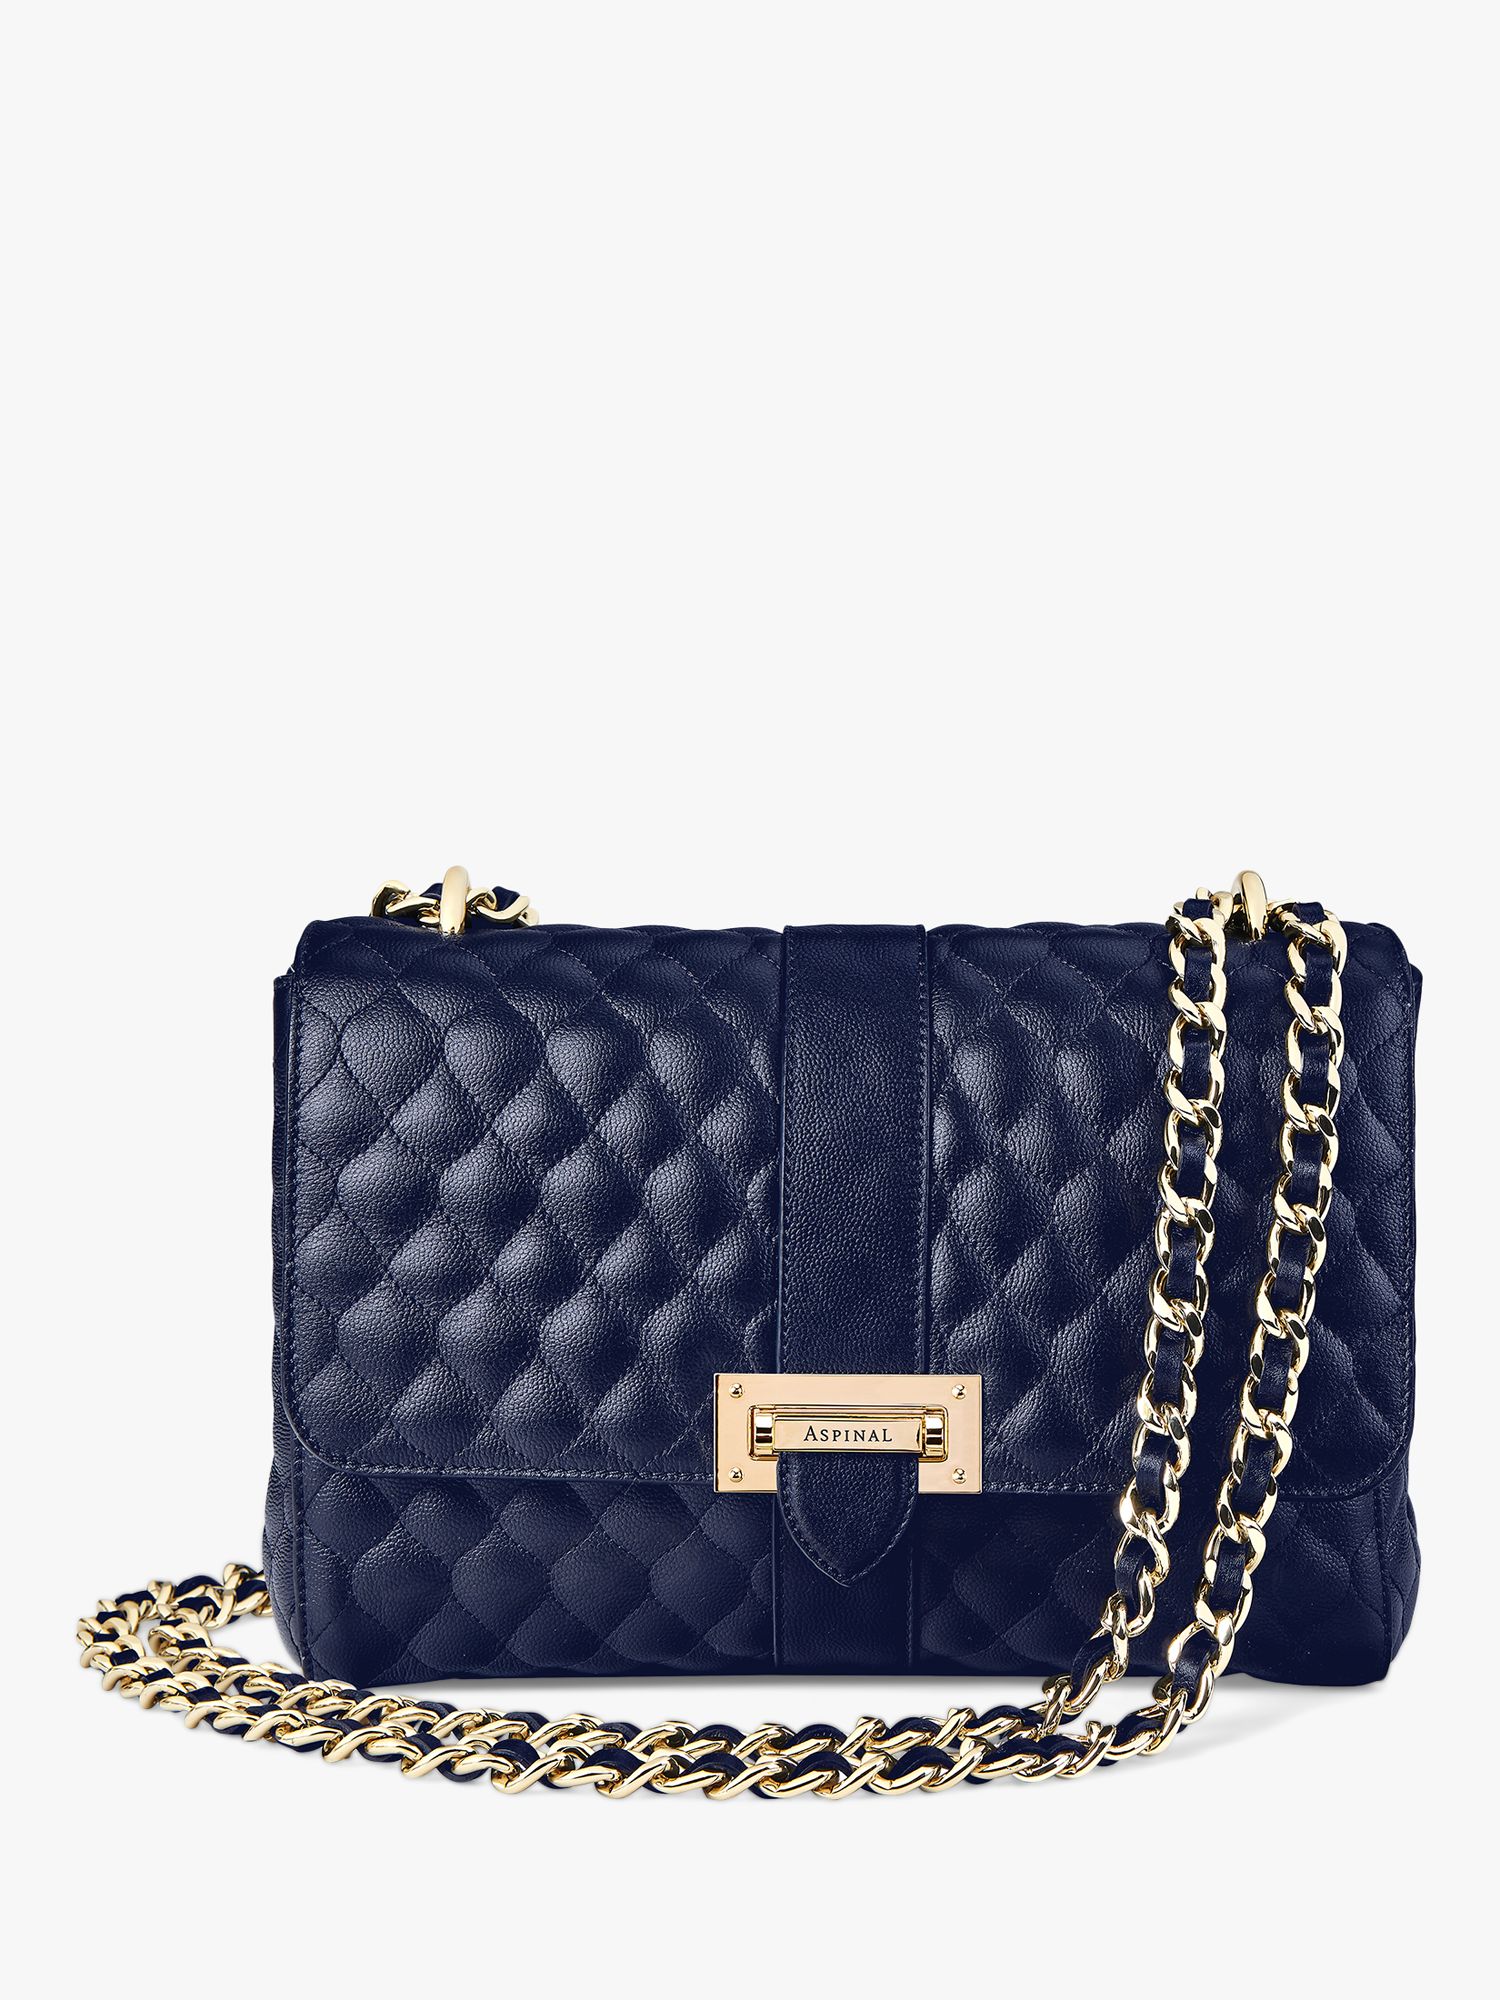 Aspinal of London Lottie Large Quilted Pebble Leather Shoulder Bag, Navy